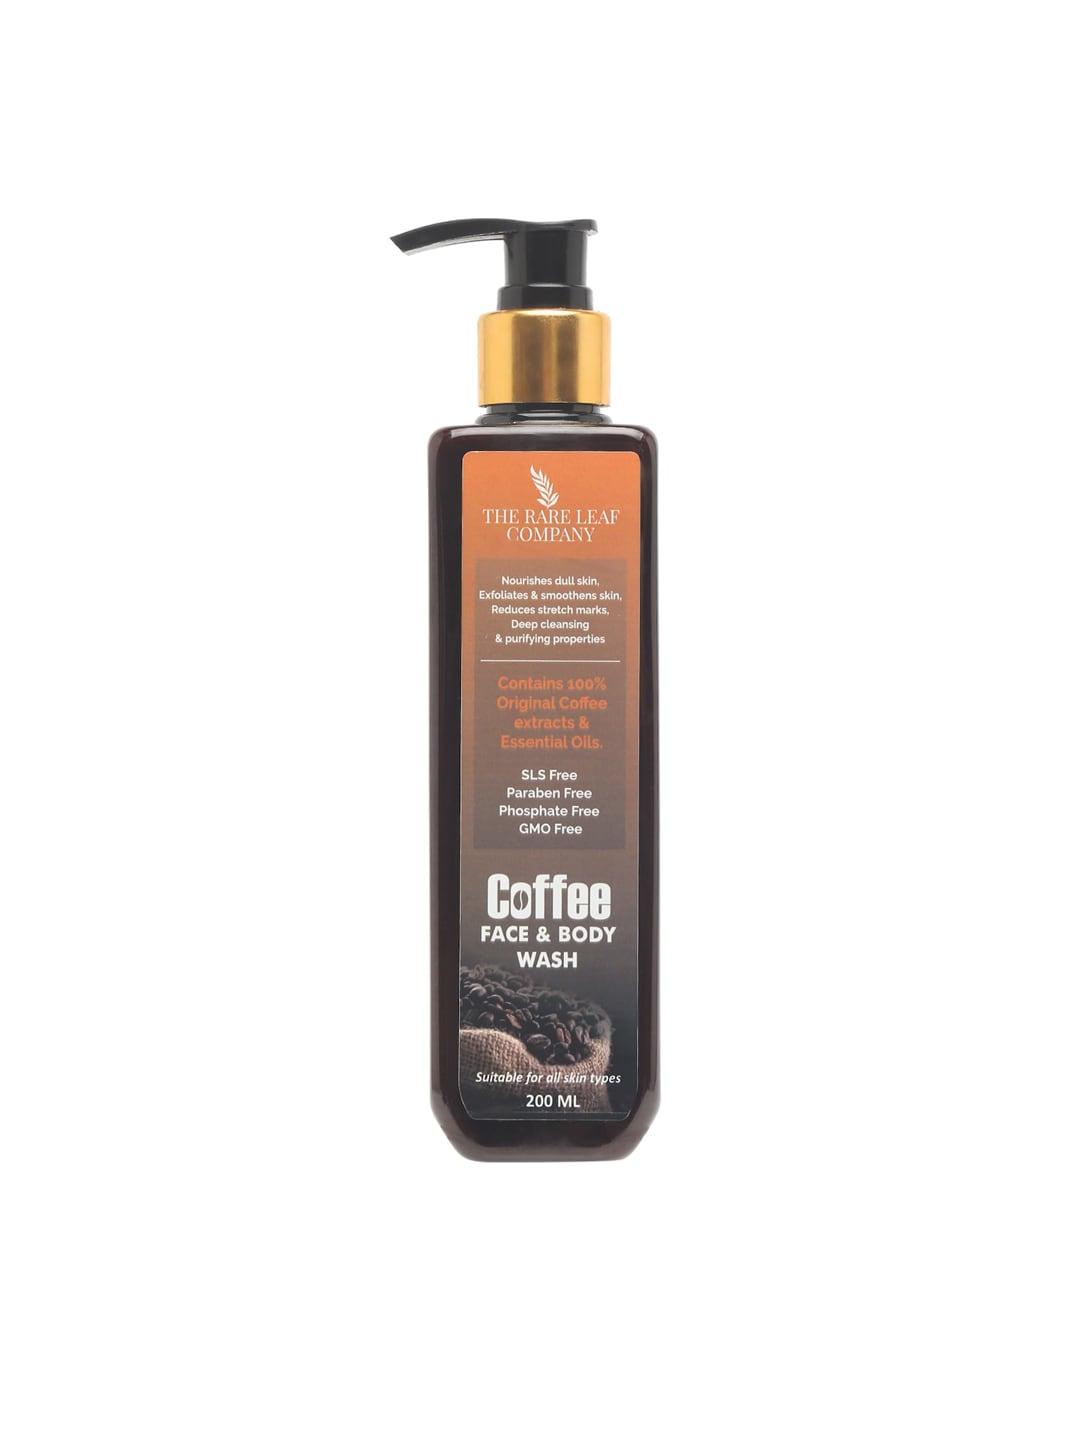 THE RARE LEAF COMPANY Coffee Face & Body Wash with Essential Oils - 200 ml